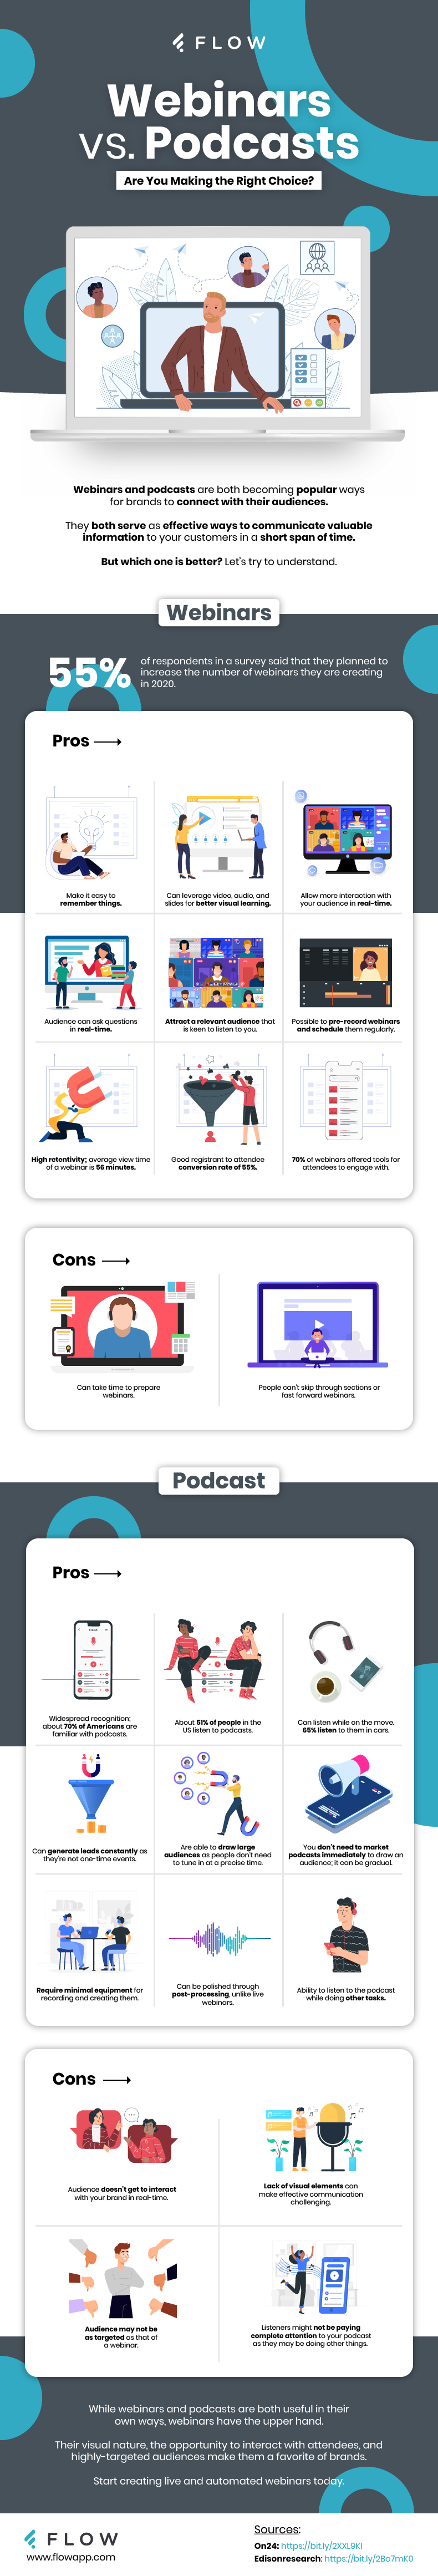 Webinars vs. Podcasts: Are You Making the Right Choice?